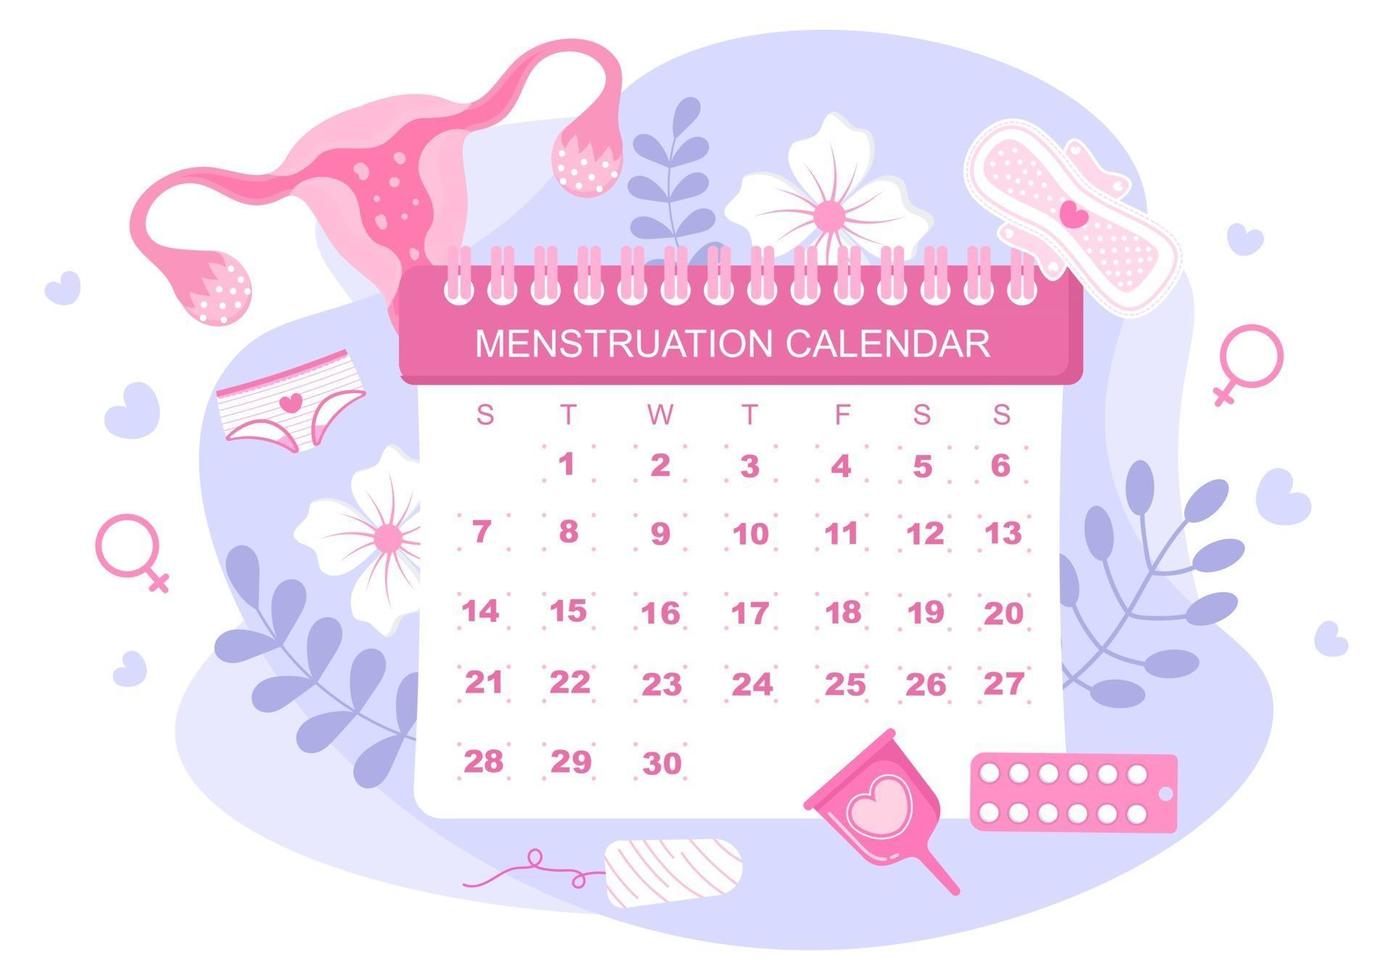 Menstruation Period Calendar Women To Check Date Cycle Illustration vector